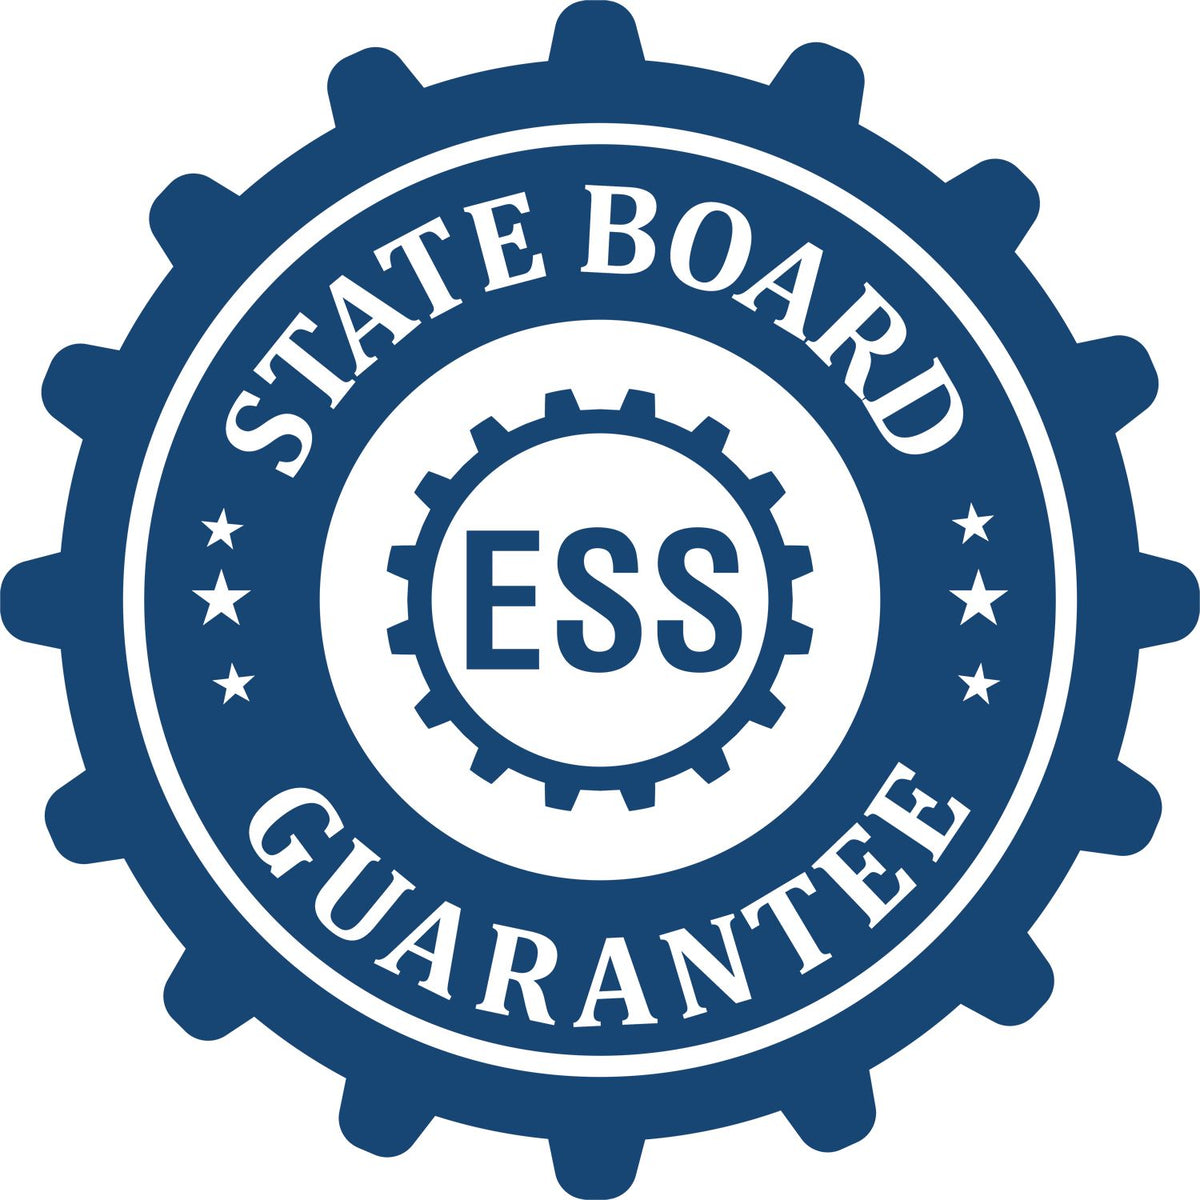 An emblem in a gear shape illustrating a state board guarantee for the Hybrid Georgia Landscape Architect Seal